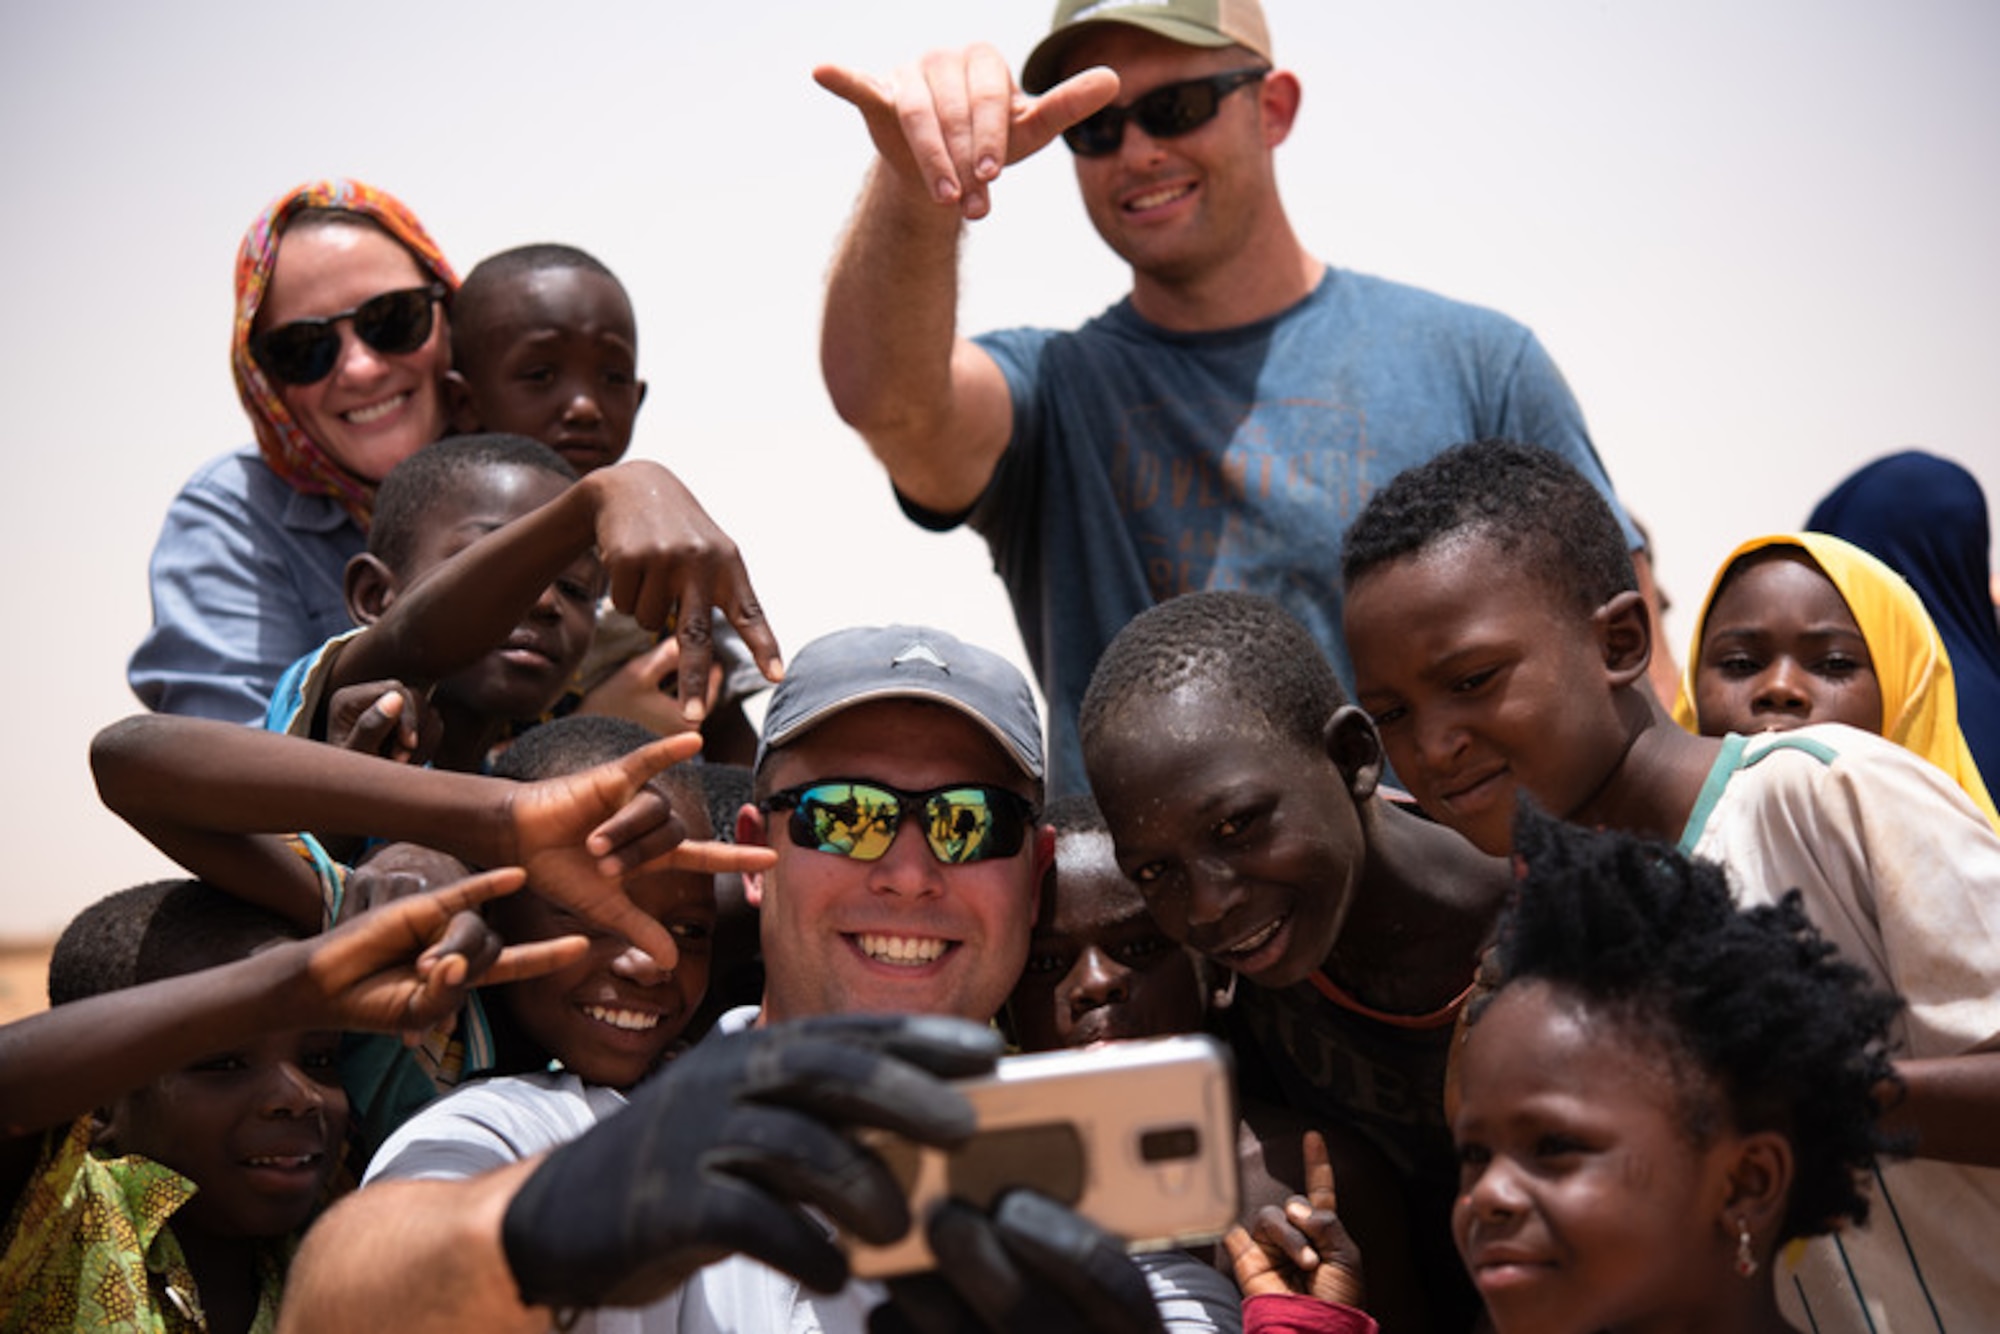 U.S. Air Force Staff Sgt. Jacob Johnson, 435th Air Expeditionary Wing chaplain assistant, takes a selfie with Nigerien children at a village in Agadez, Niger, June 27, 2019. Johnson assisted the 724th Expeditionary Air Base Squadron civil engineer flight with constructing a classroom for the village. (U.S. Air Force photo by Staff Sgt. Devin Boyer)